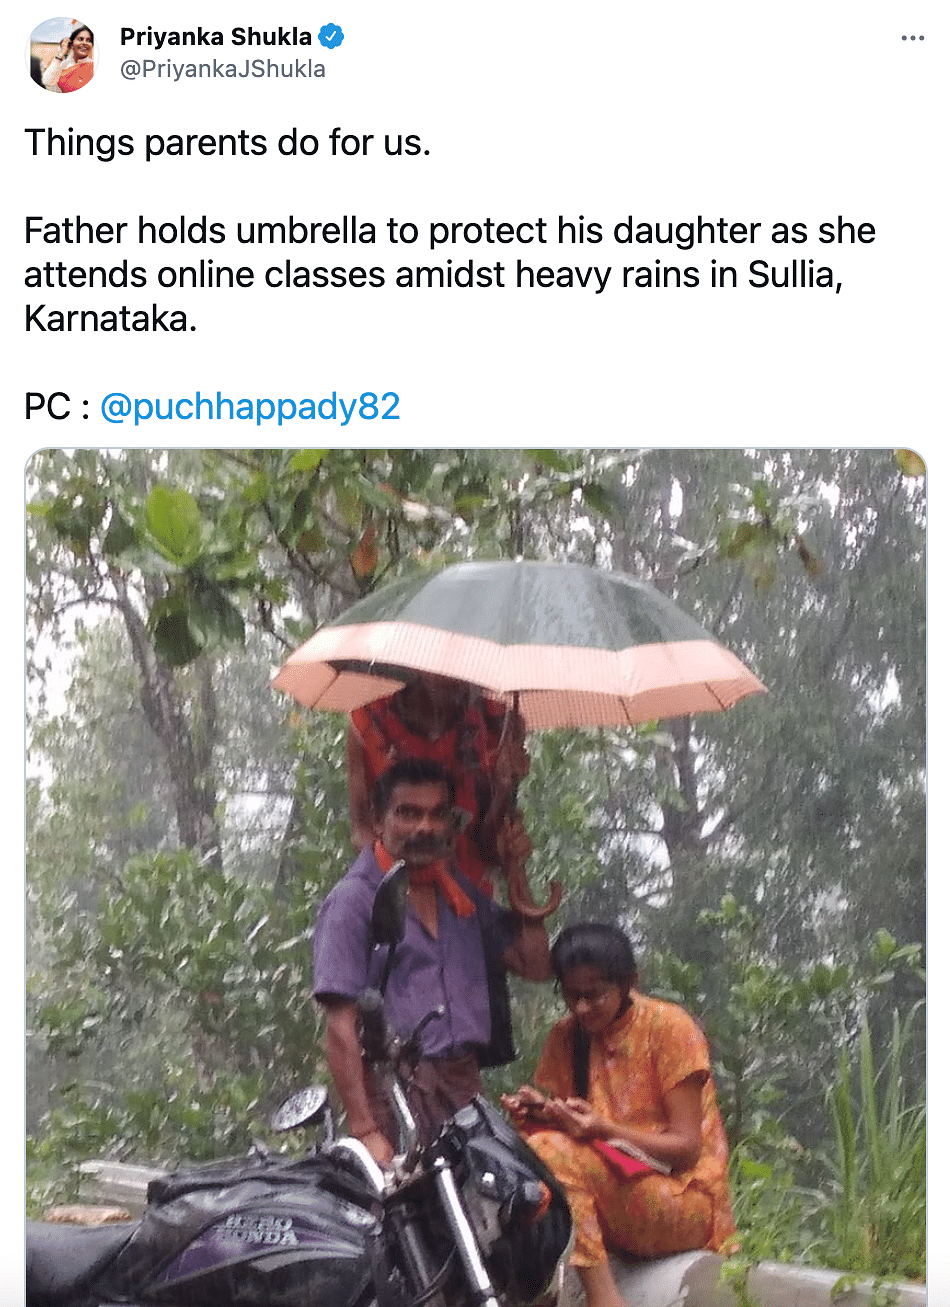 The picture of a father holding an umbrella for his daughter in the rain has gone viral.